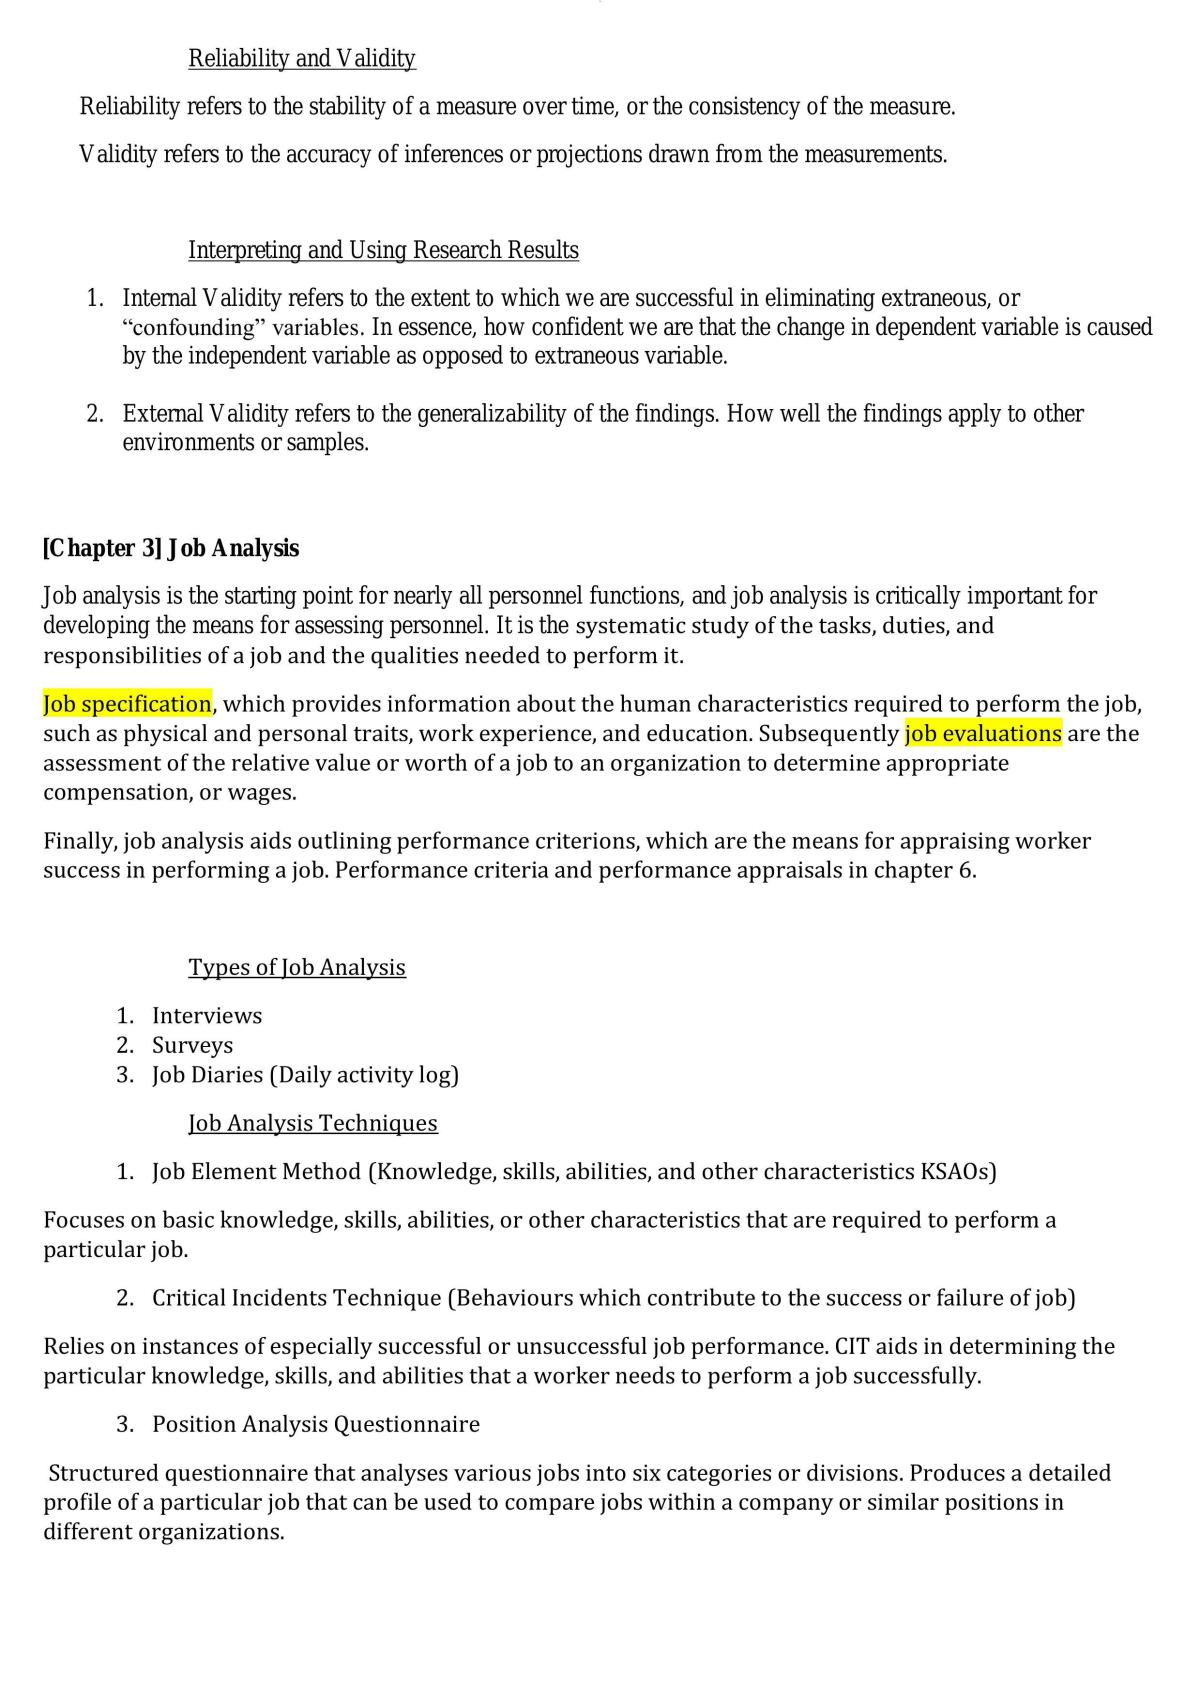 PSY201 Full Course Notes - Page 3